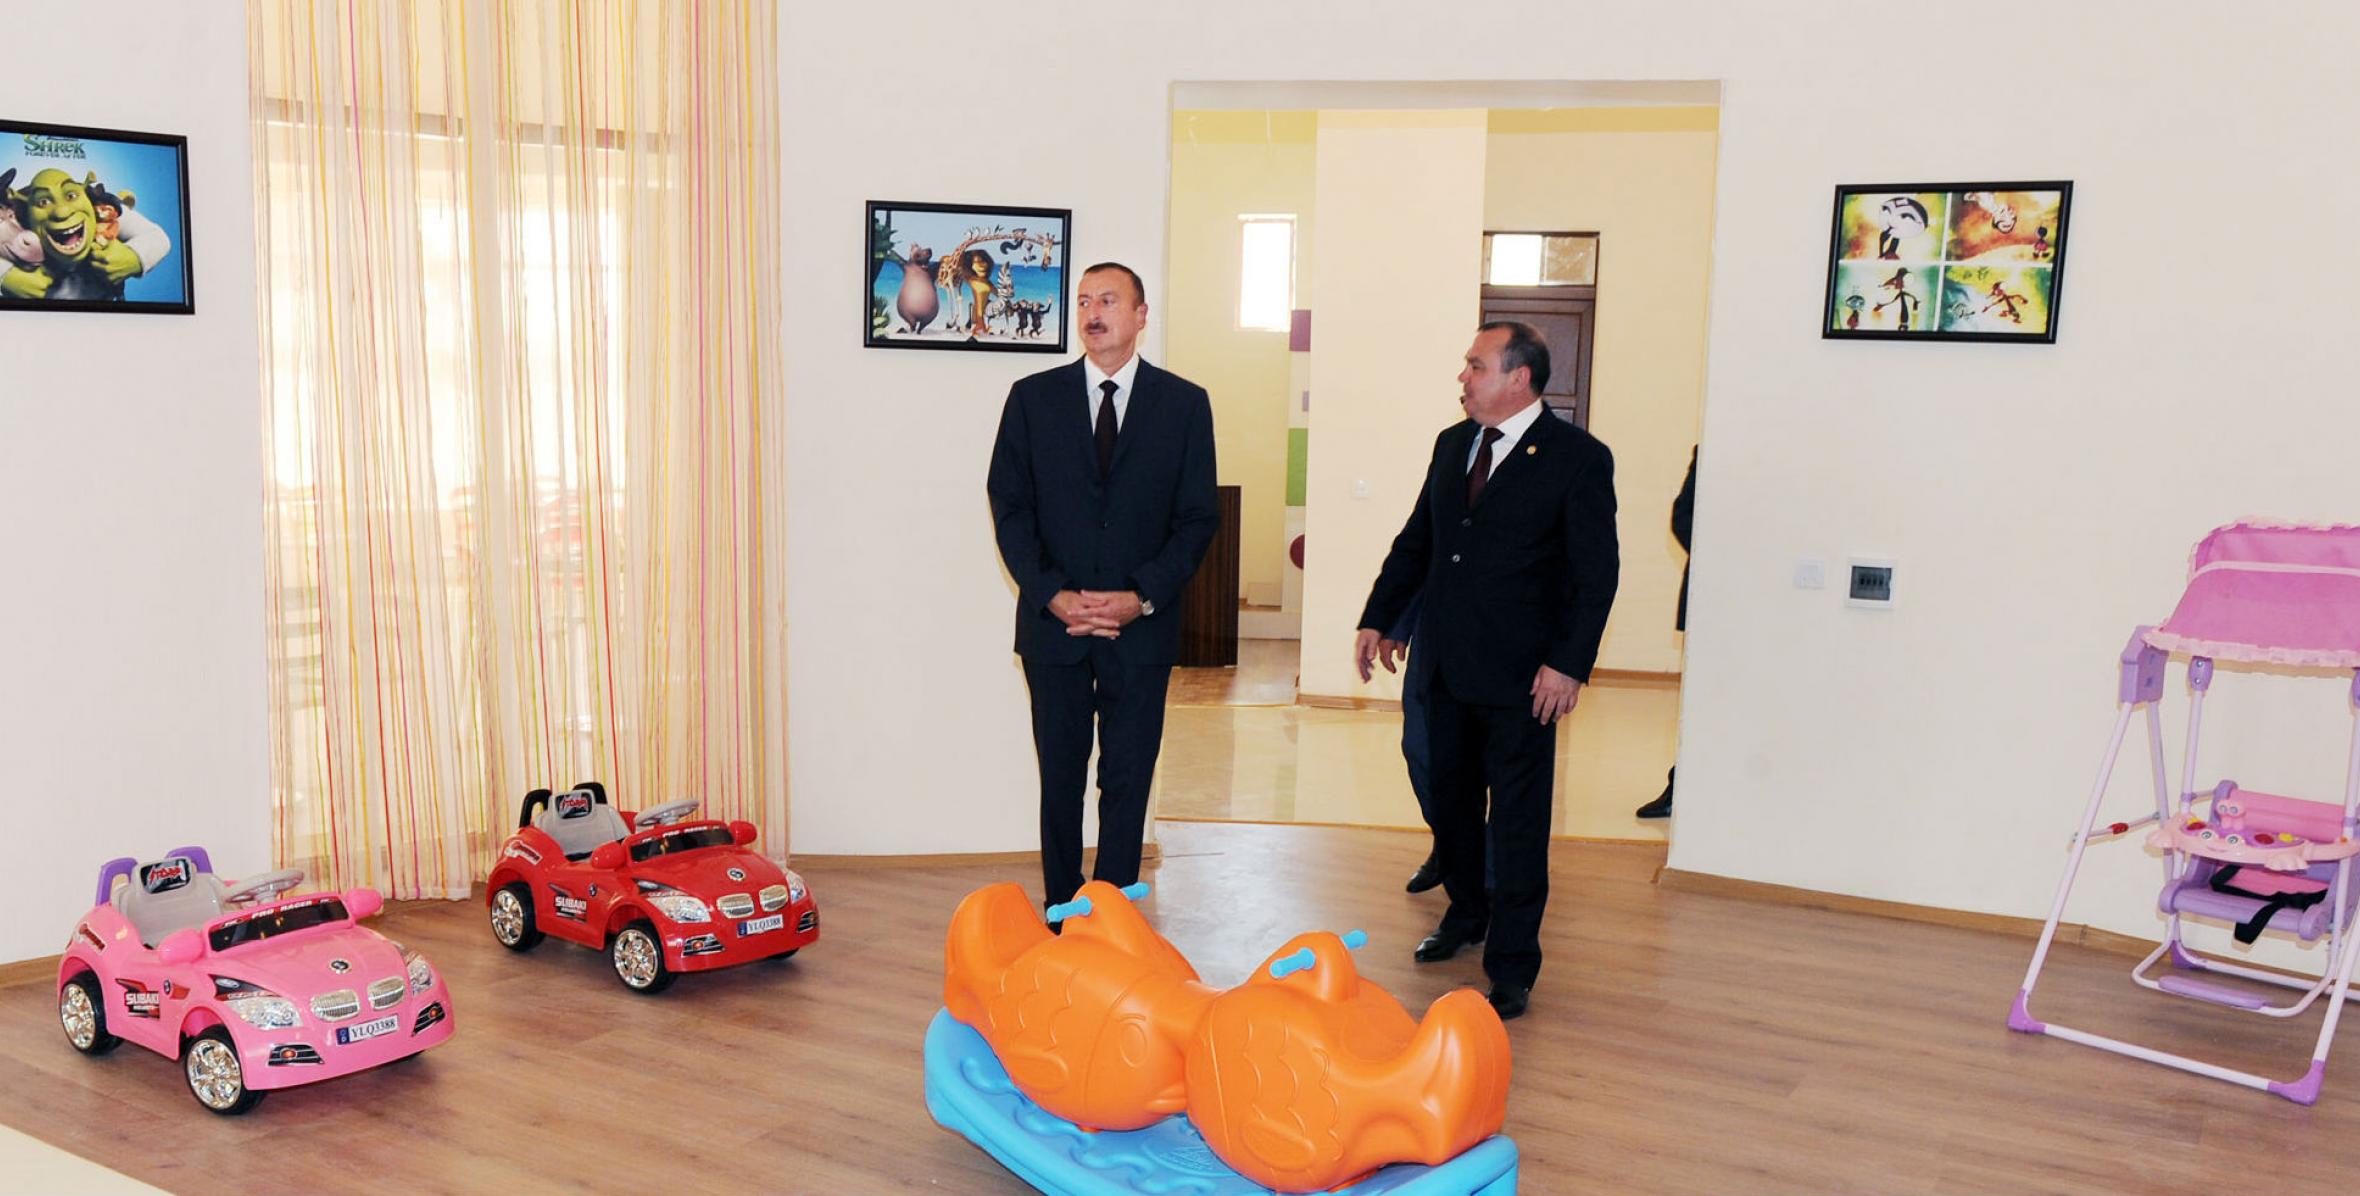 Ilham Aliyev attended the opening of a children’s entertainment center in Gazakh